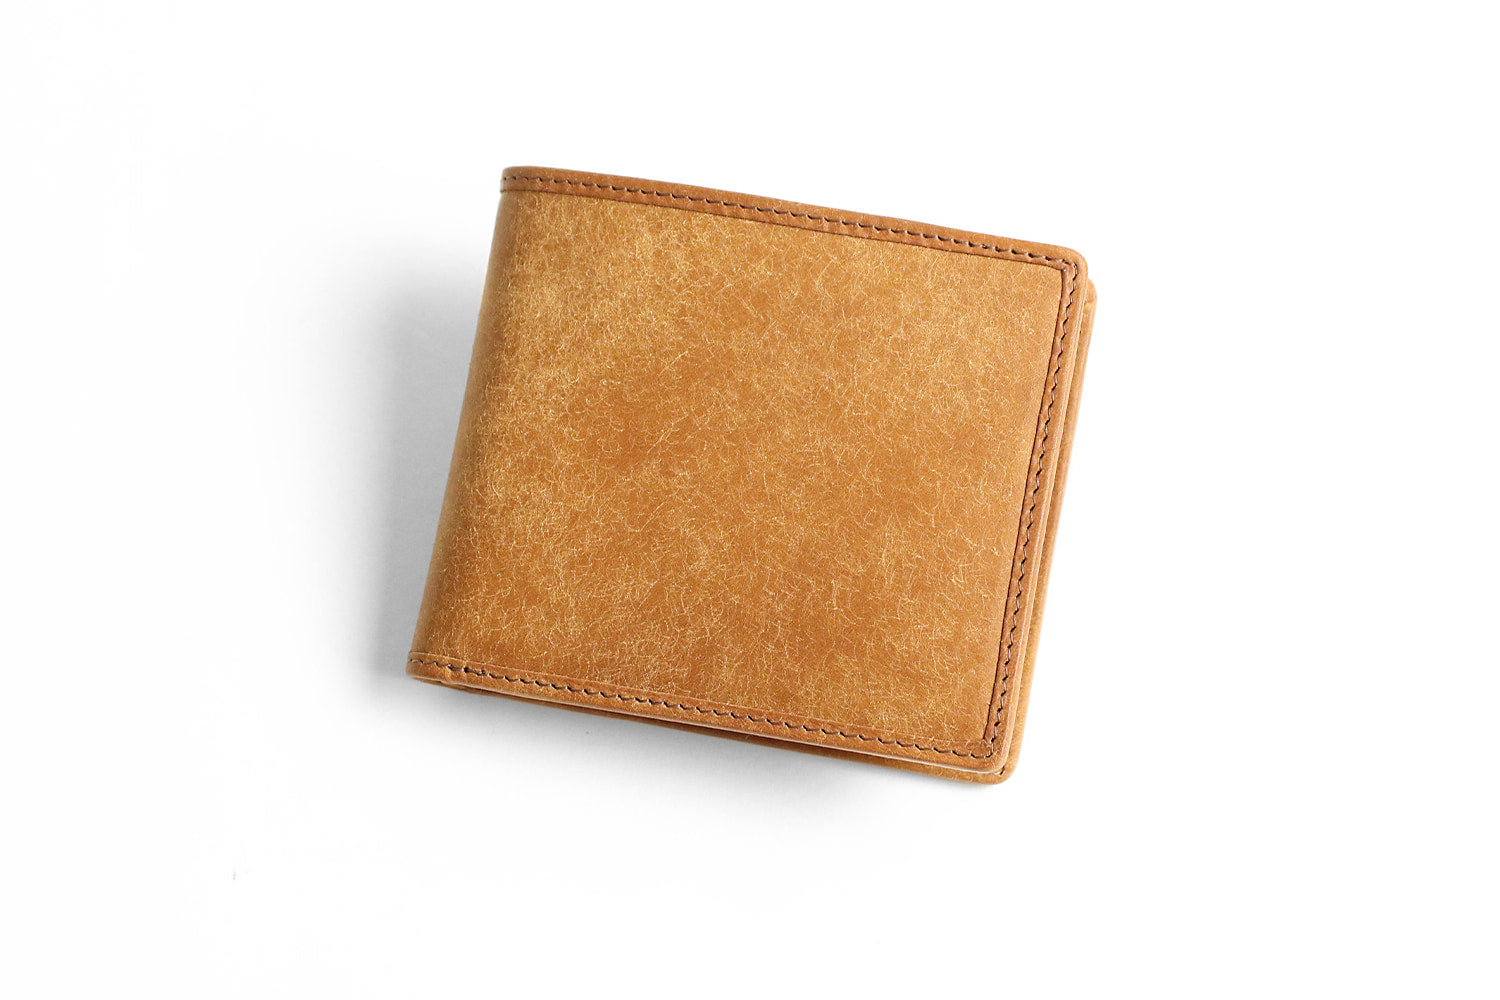 sot / Pueblo Leather Enjoy the unique aging effect. A bi-fold wallet that stands out with its unique Italian leather charm. 